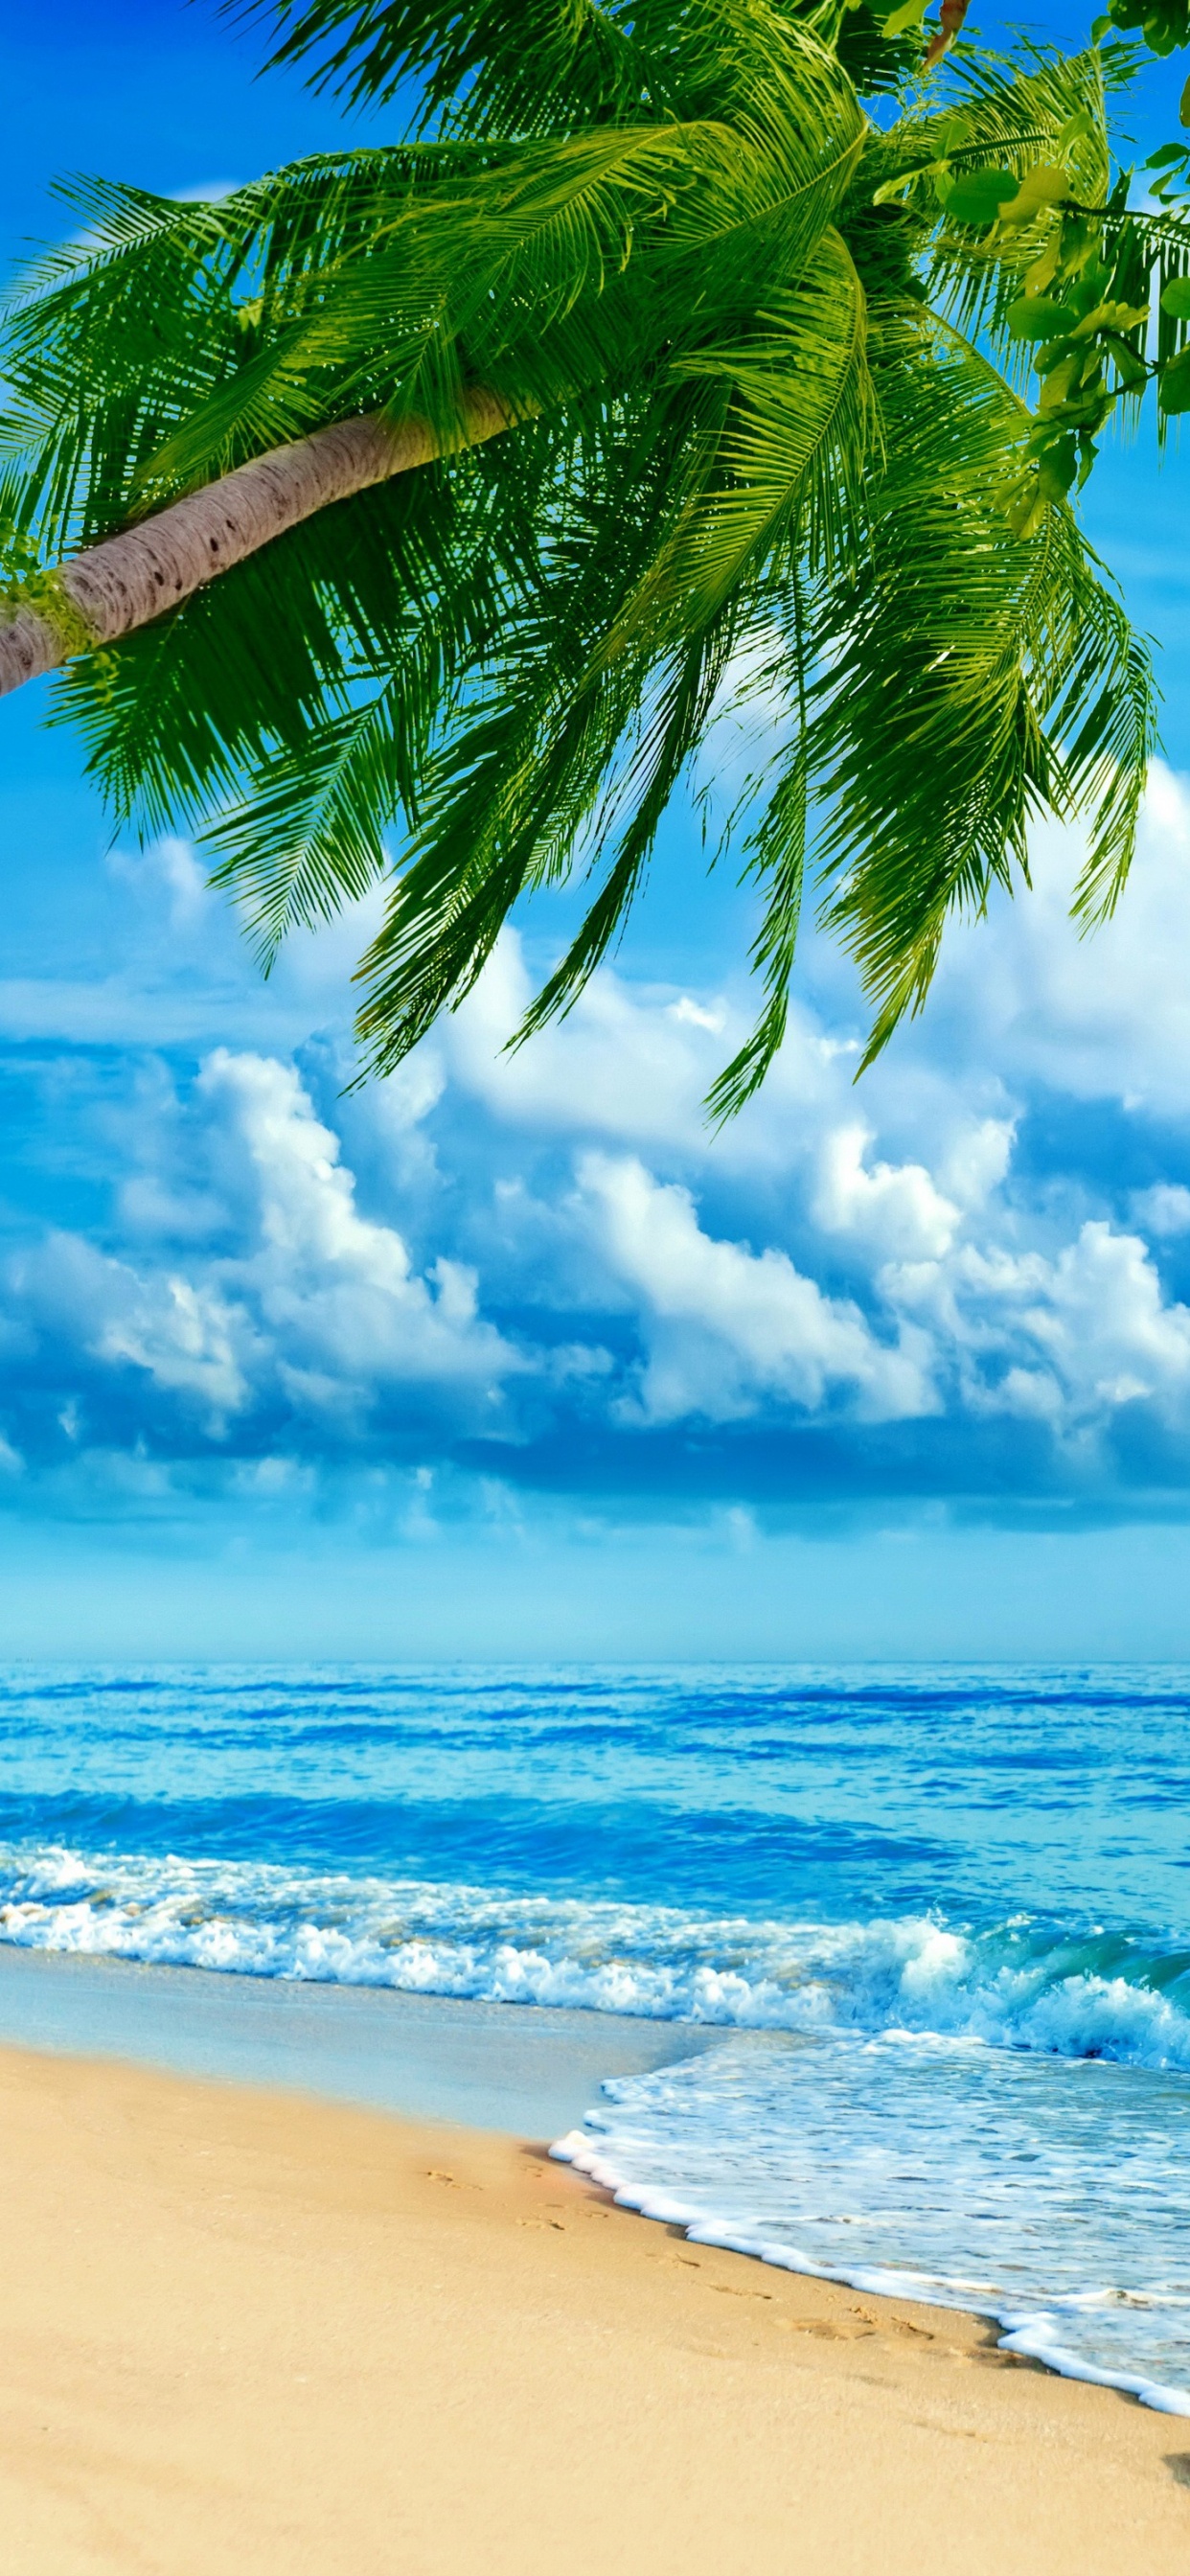 Palm Tree on Beach Shore During Daytime. Wallpaper in 1242x2688 Resolution